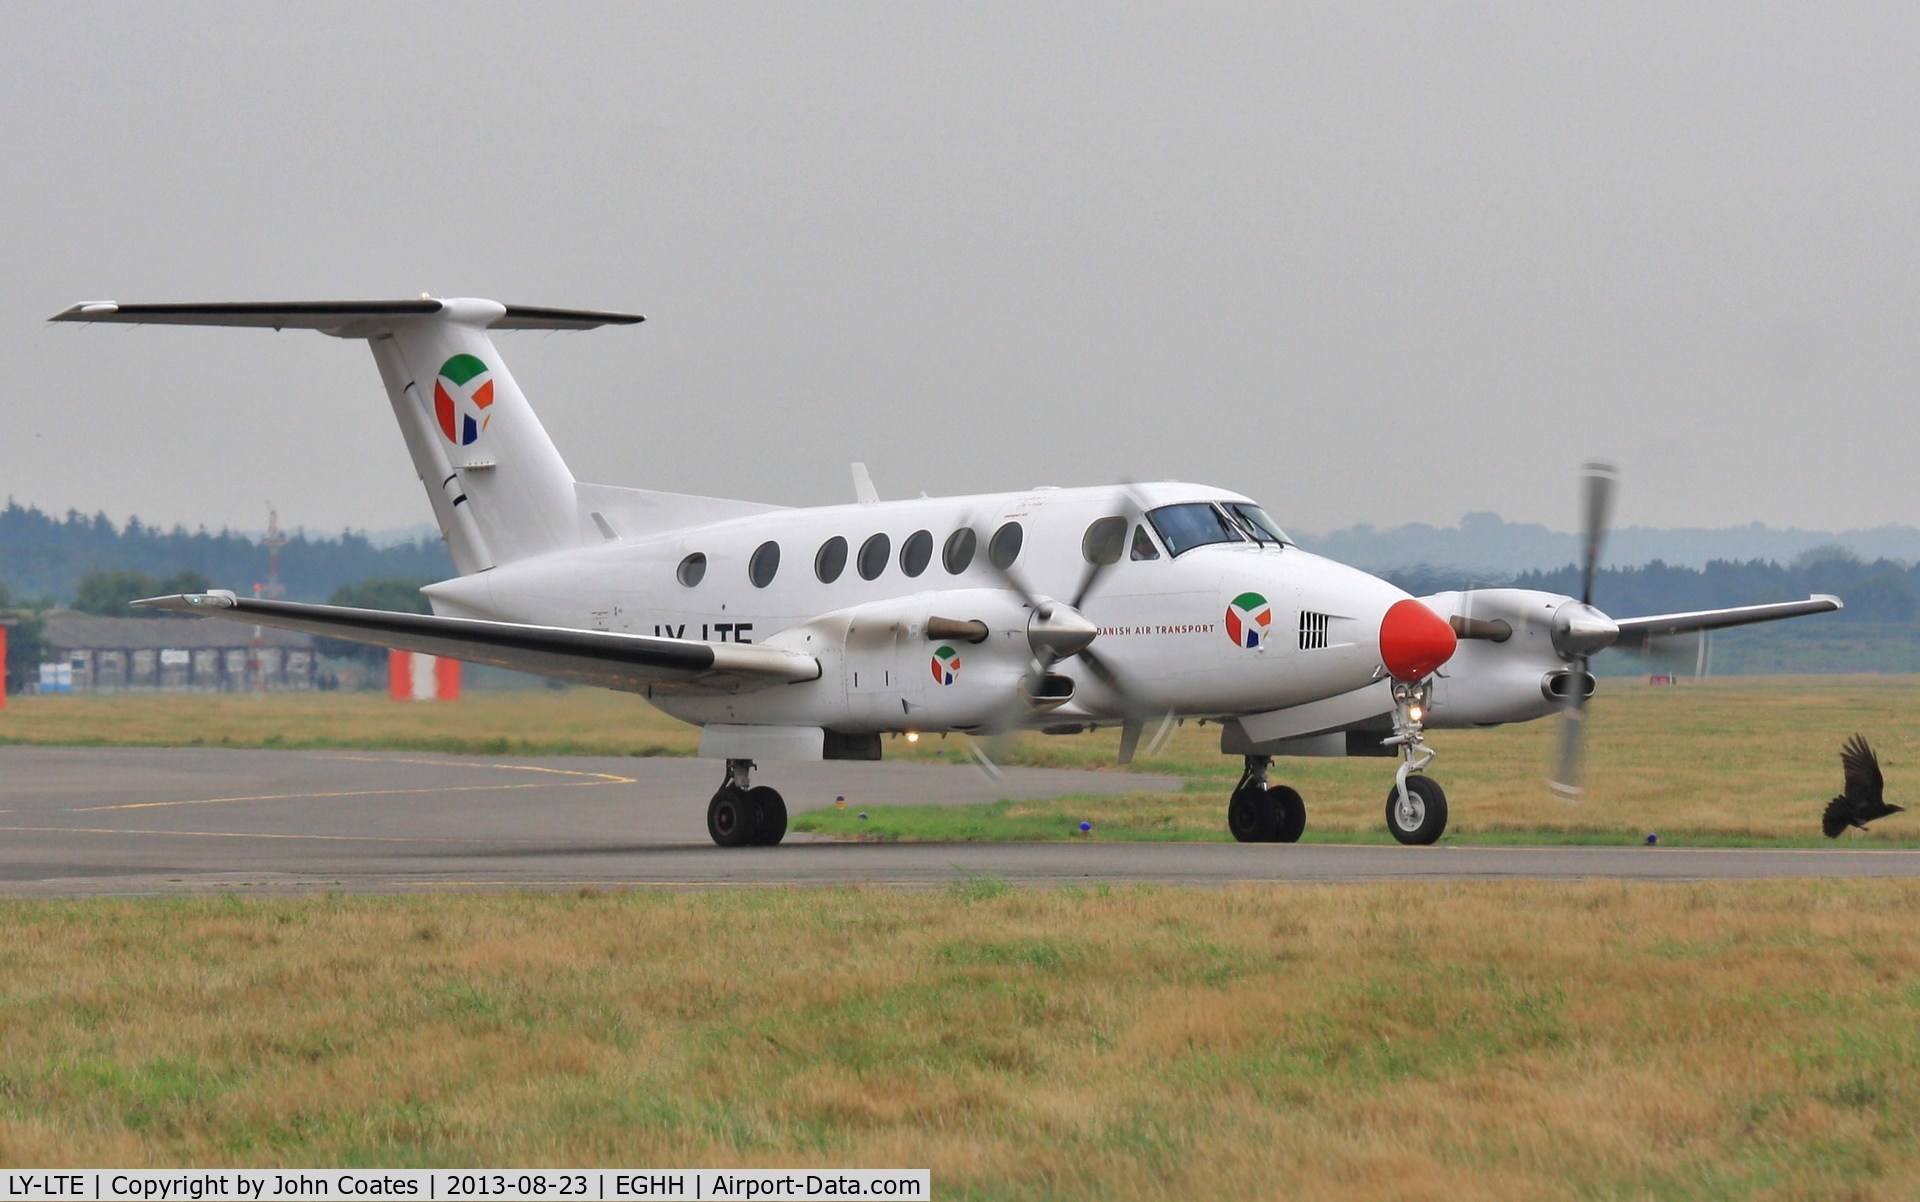 LY-LTE, 1990 Beech 300 C/N FA-206, Departing Sigs apron.